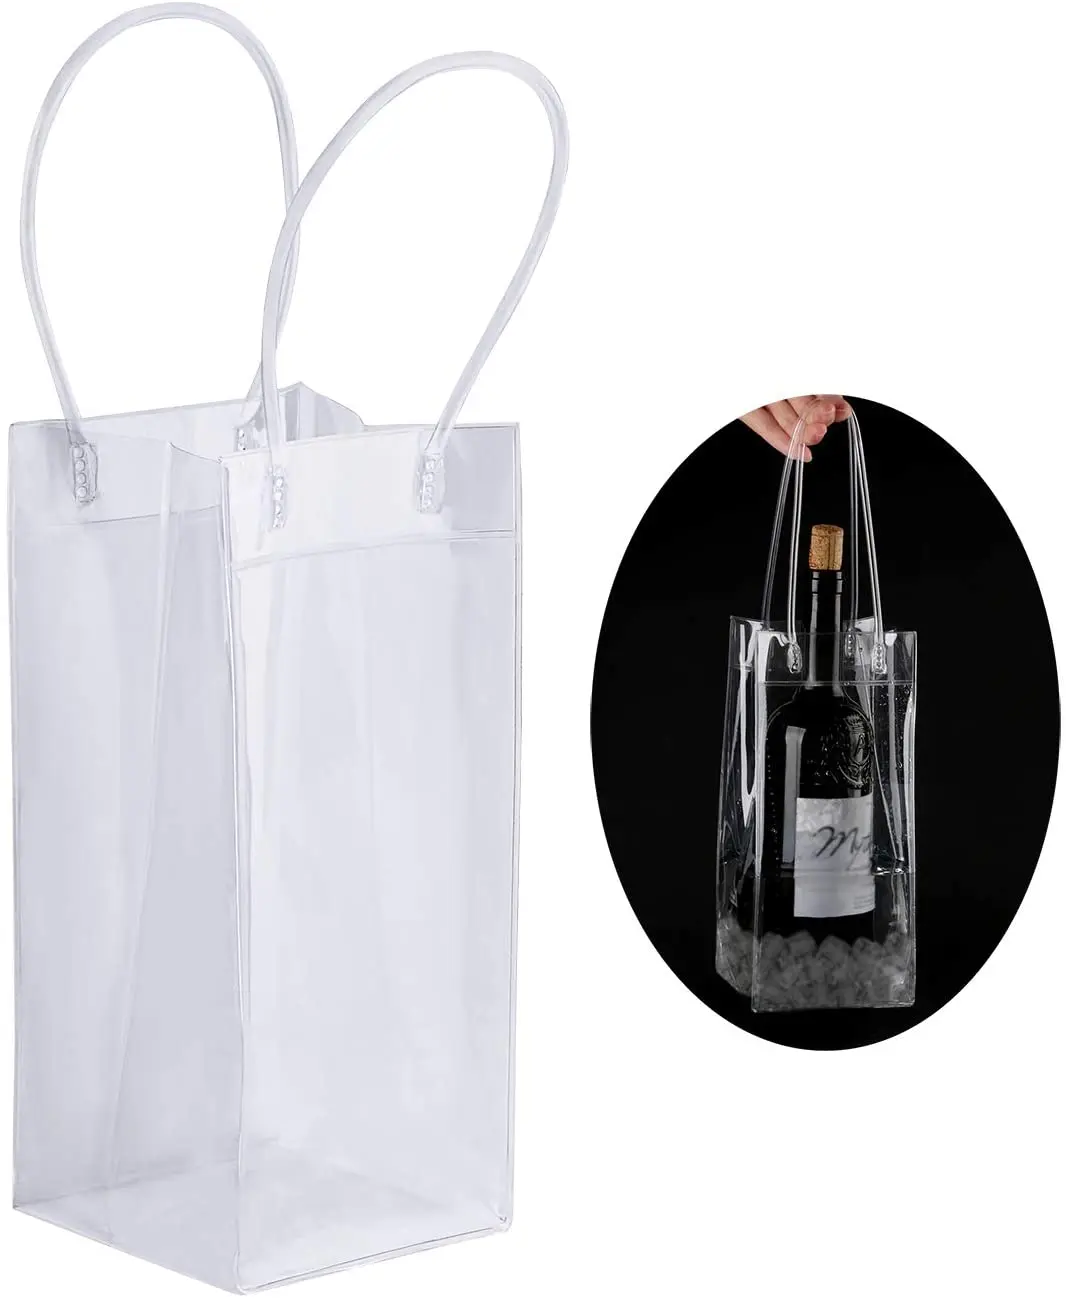 Portable Clear Transparent Pvc Wine Ice Bag Wine Pouch Cooler Bag With ...